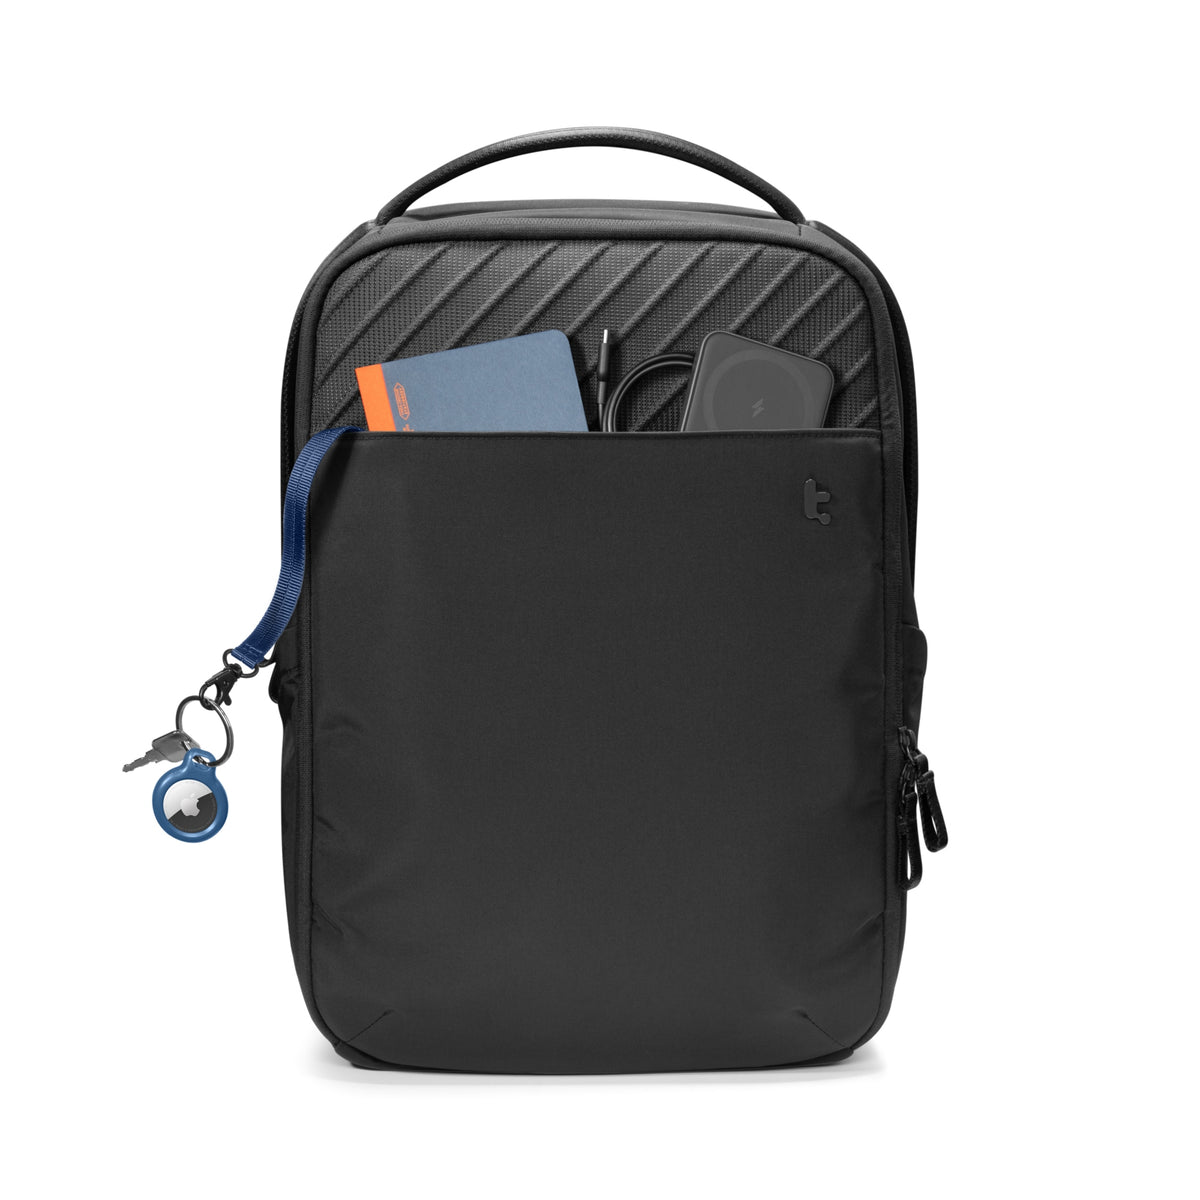 secondary_Voyage-T50 Laptop Backpack 20L